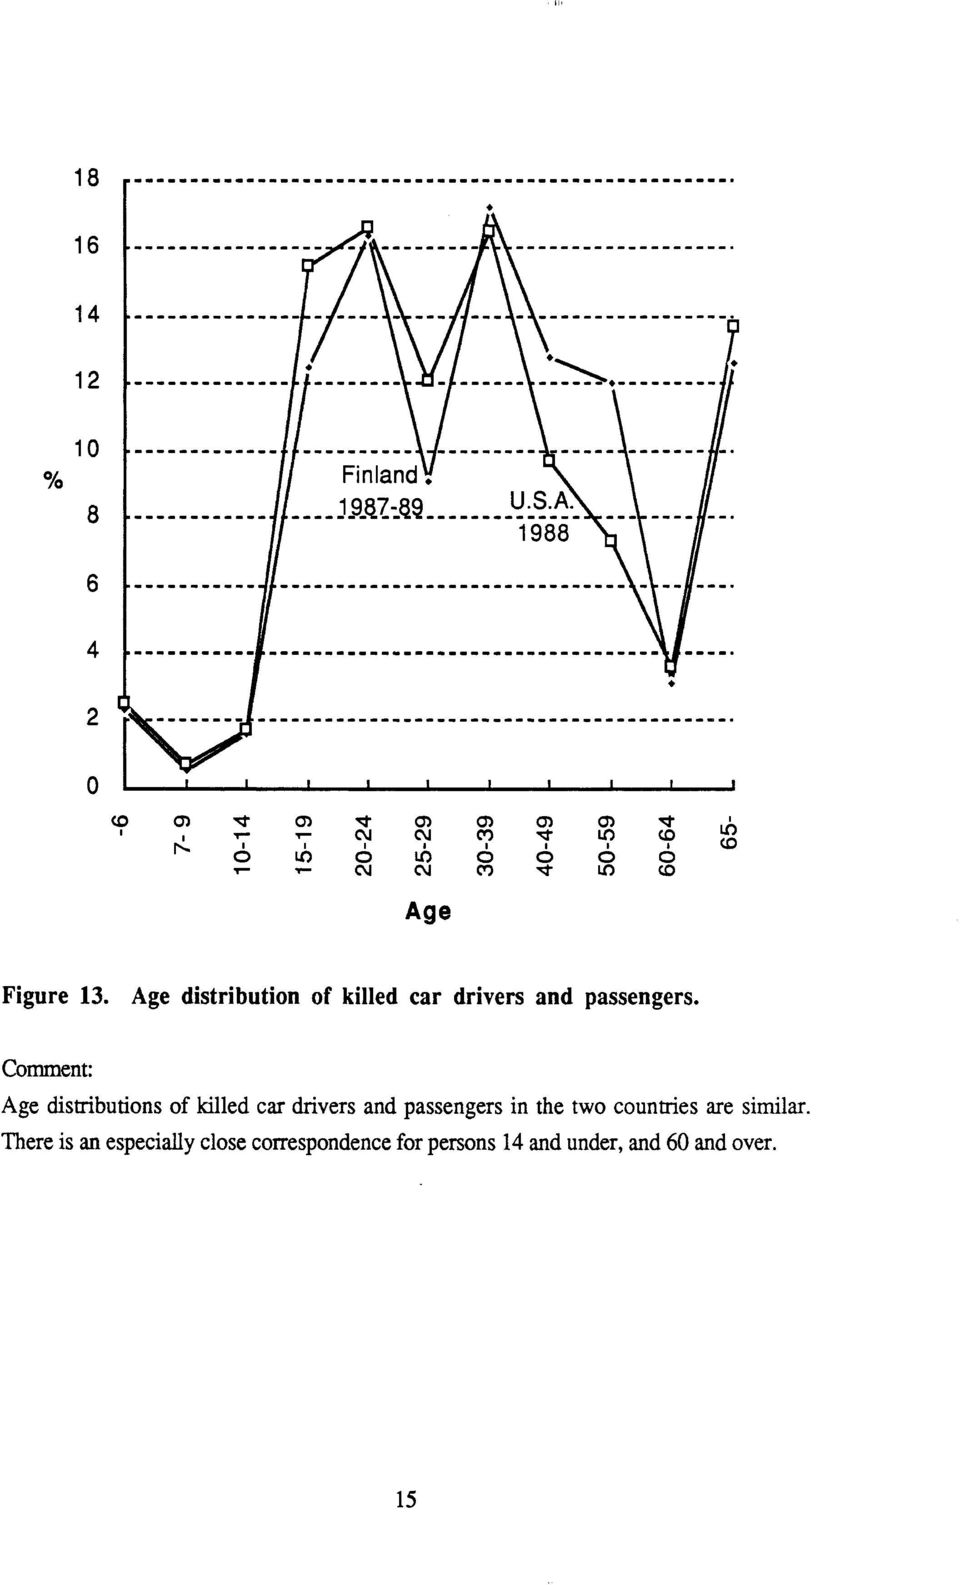 Comment: Age distributions of killed car drivers and